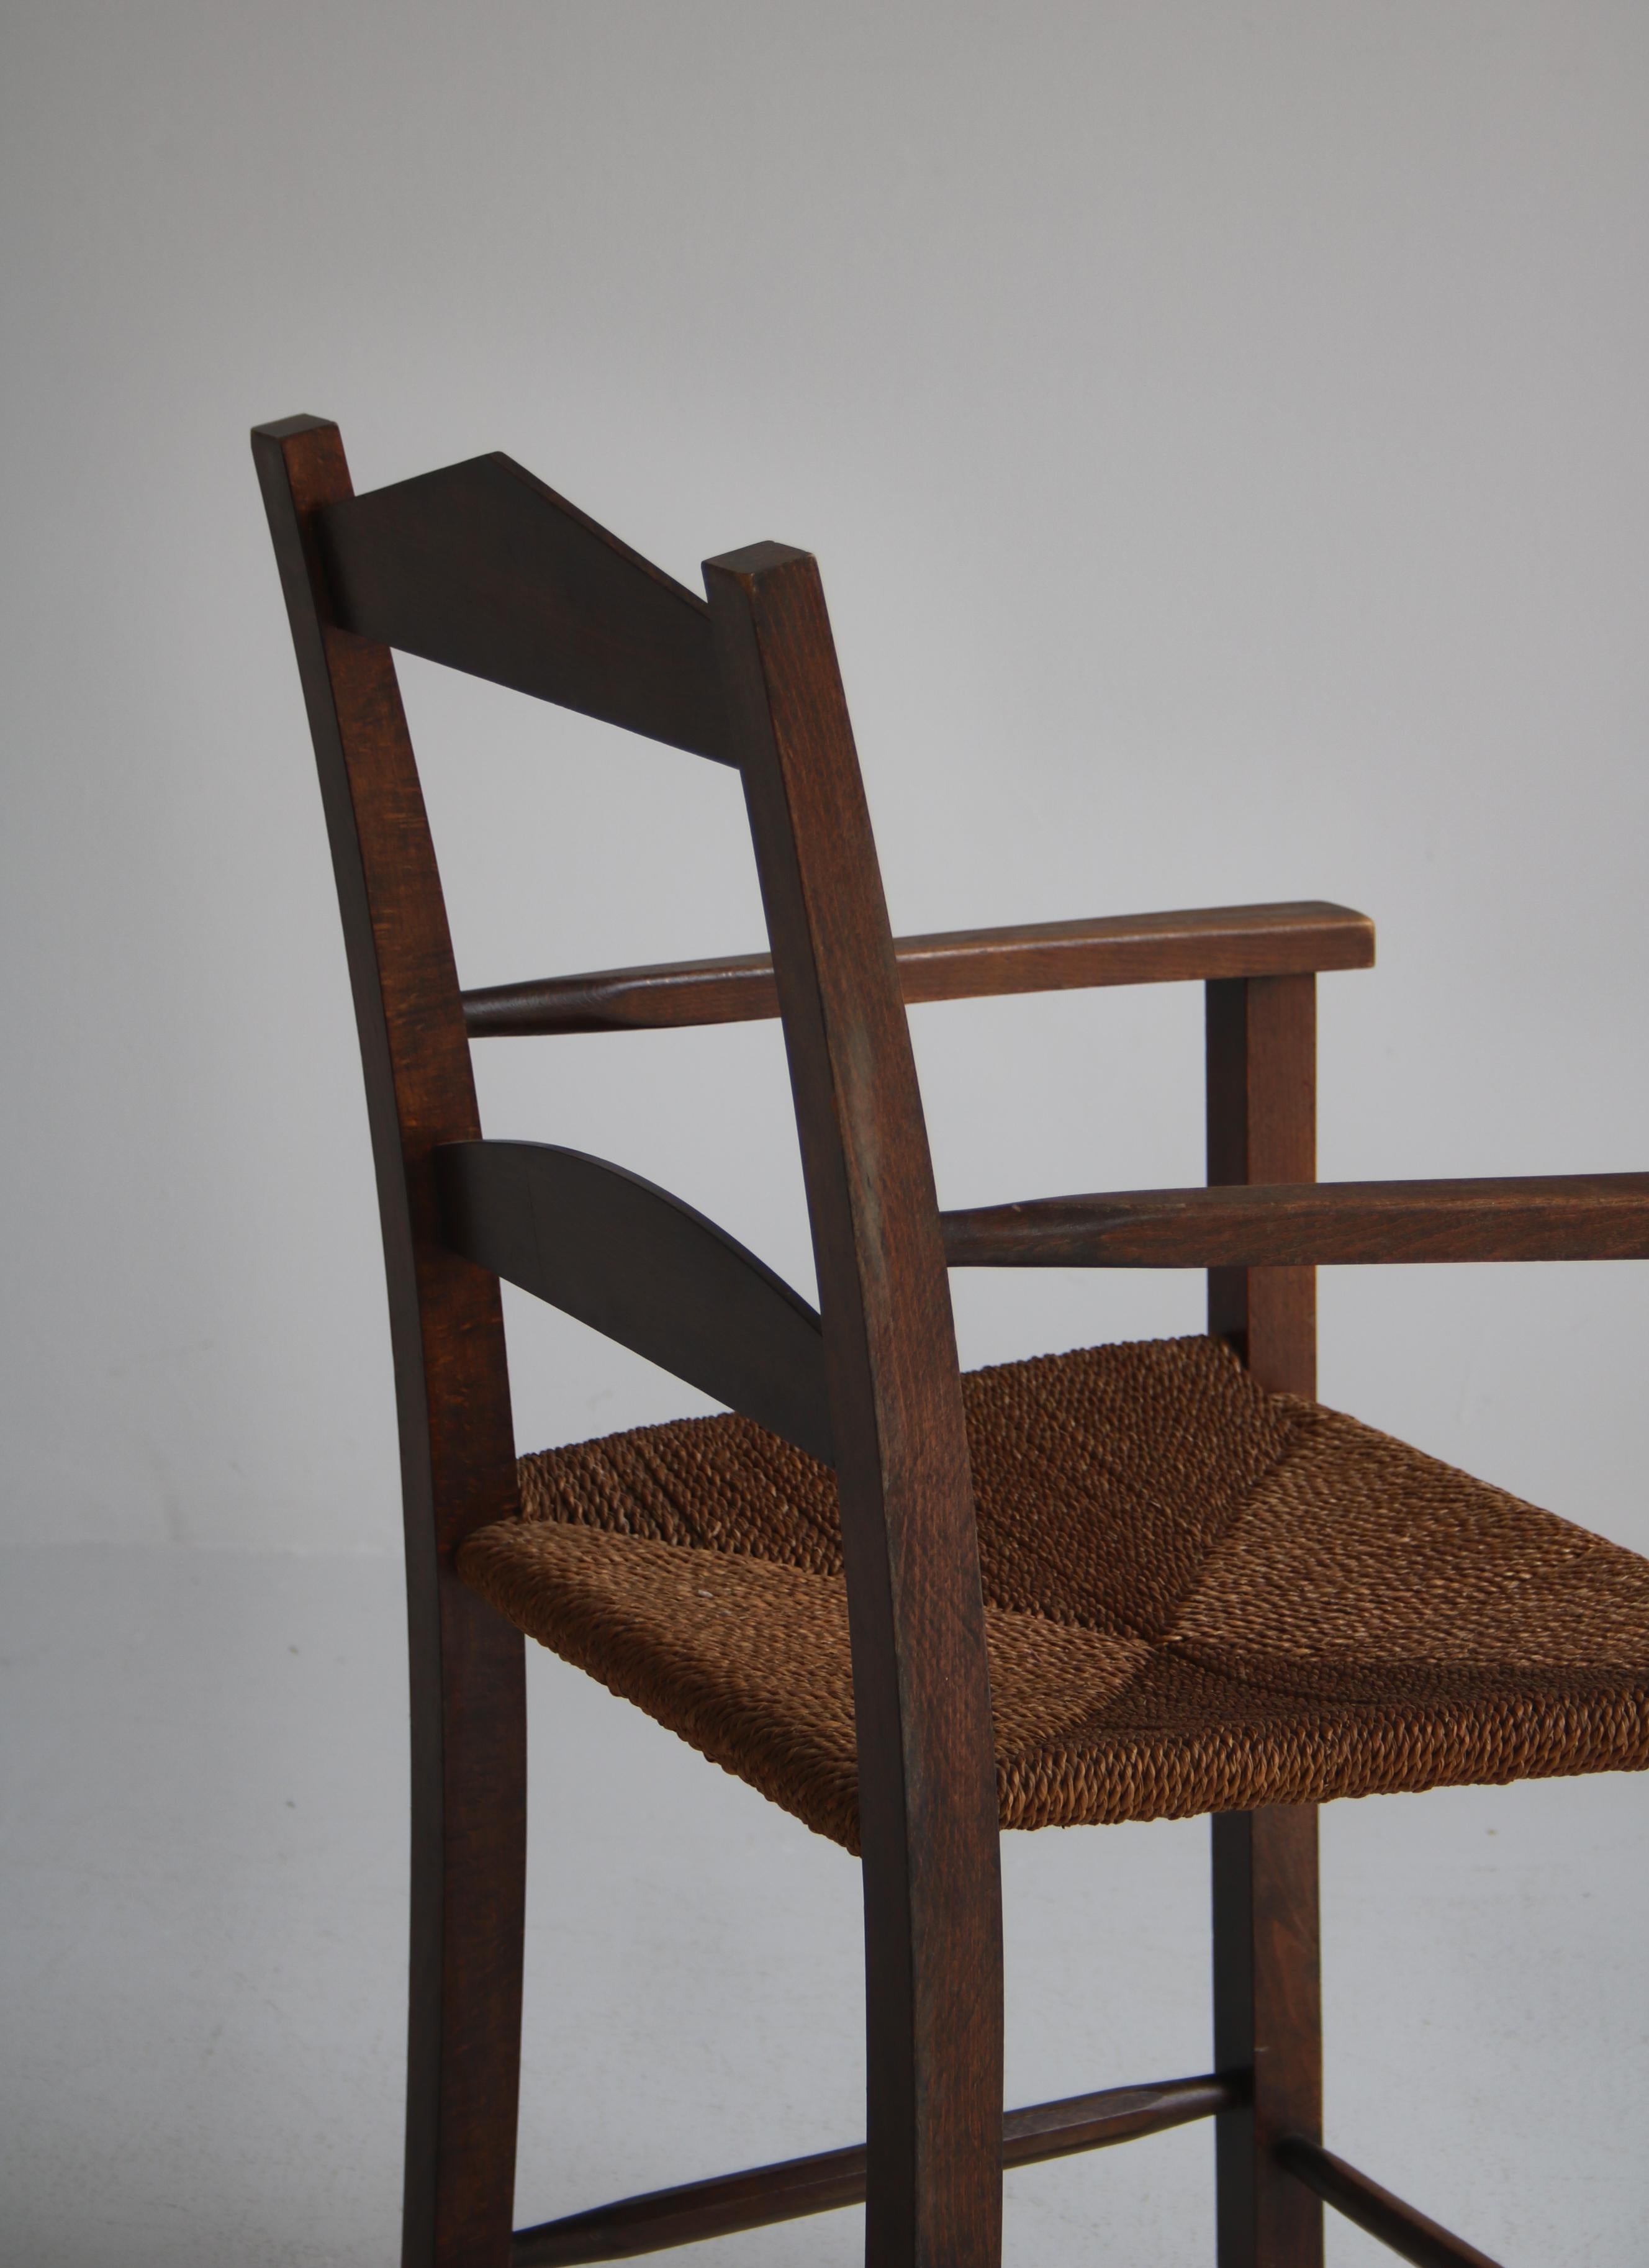 Pair of Armchairs in Dark Stained Pine and Seagrass Danish Cabinetmaker, 1940s For Sale 6